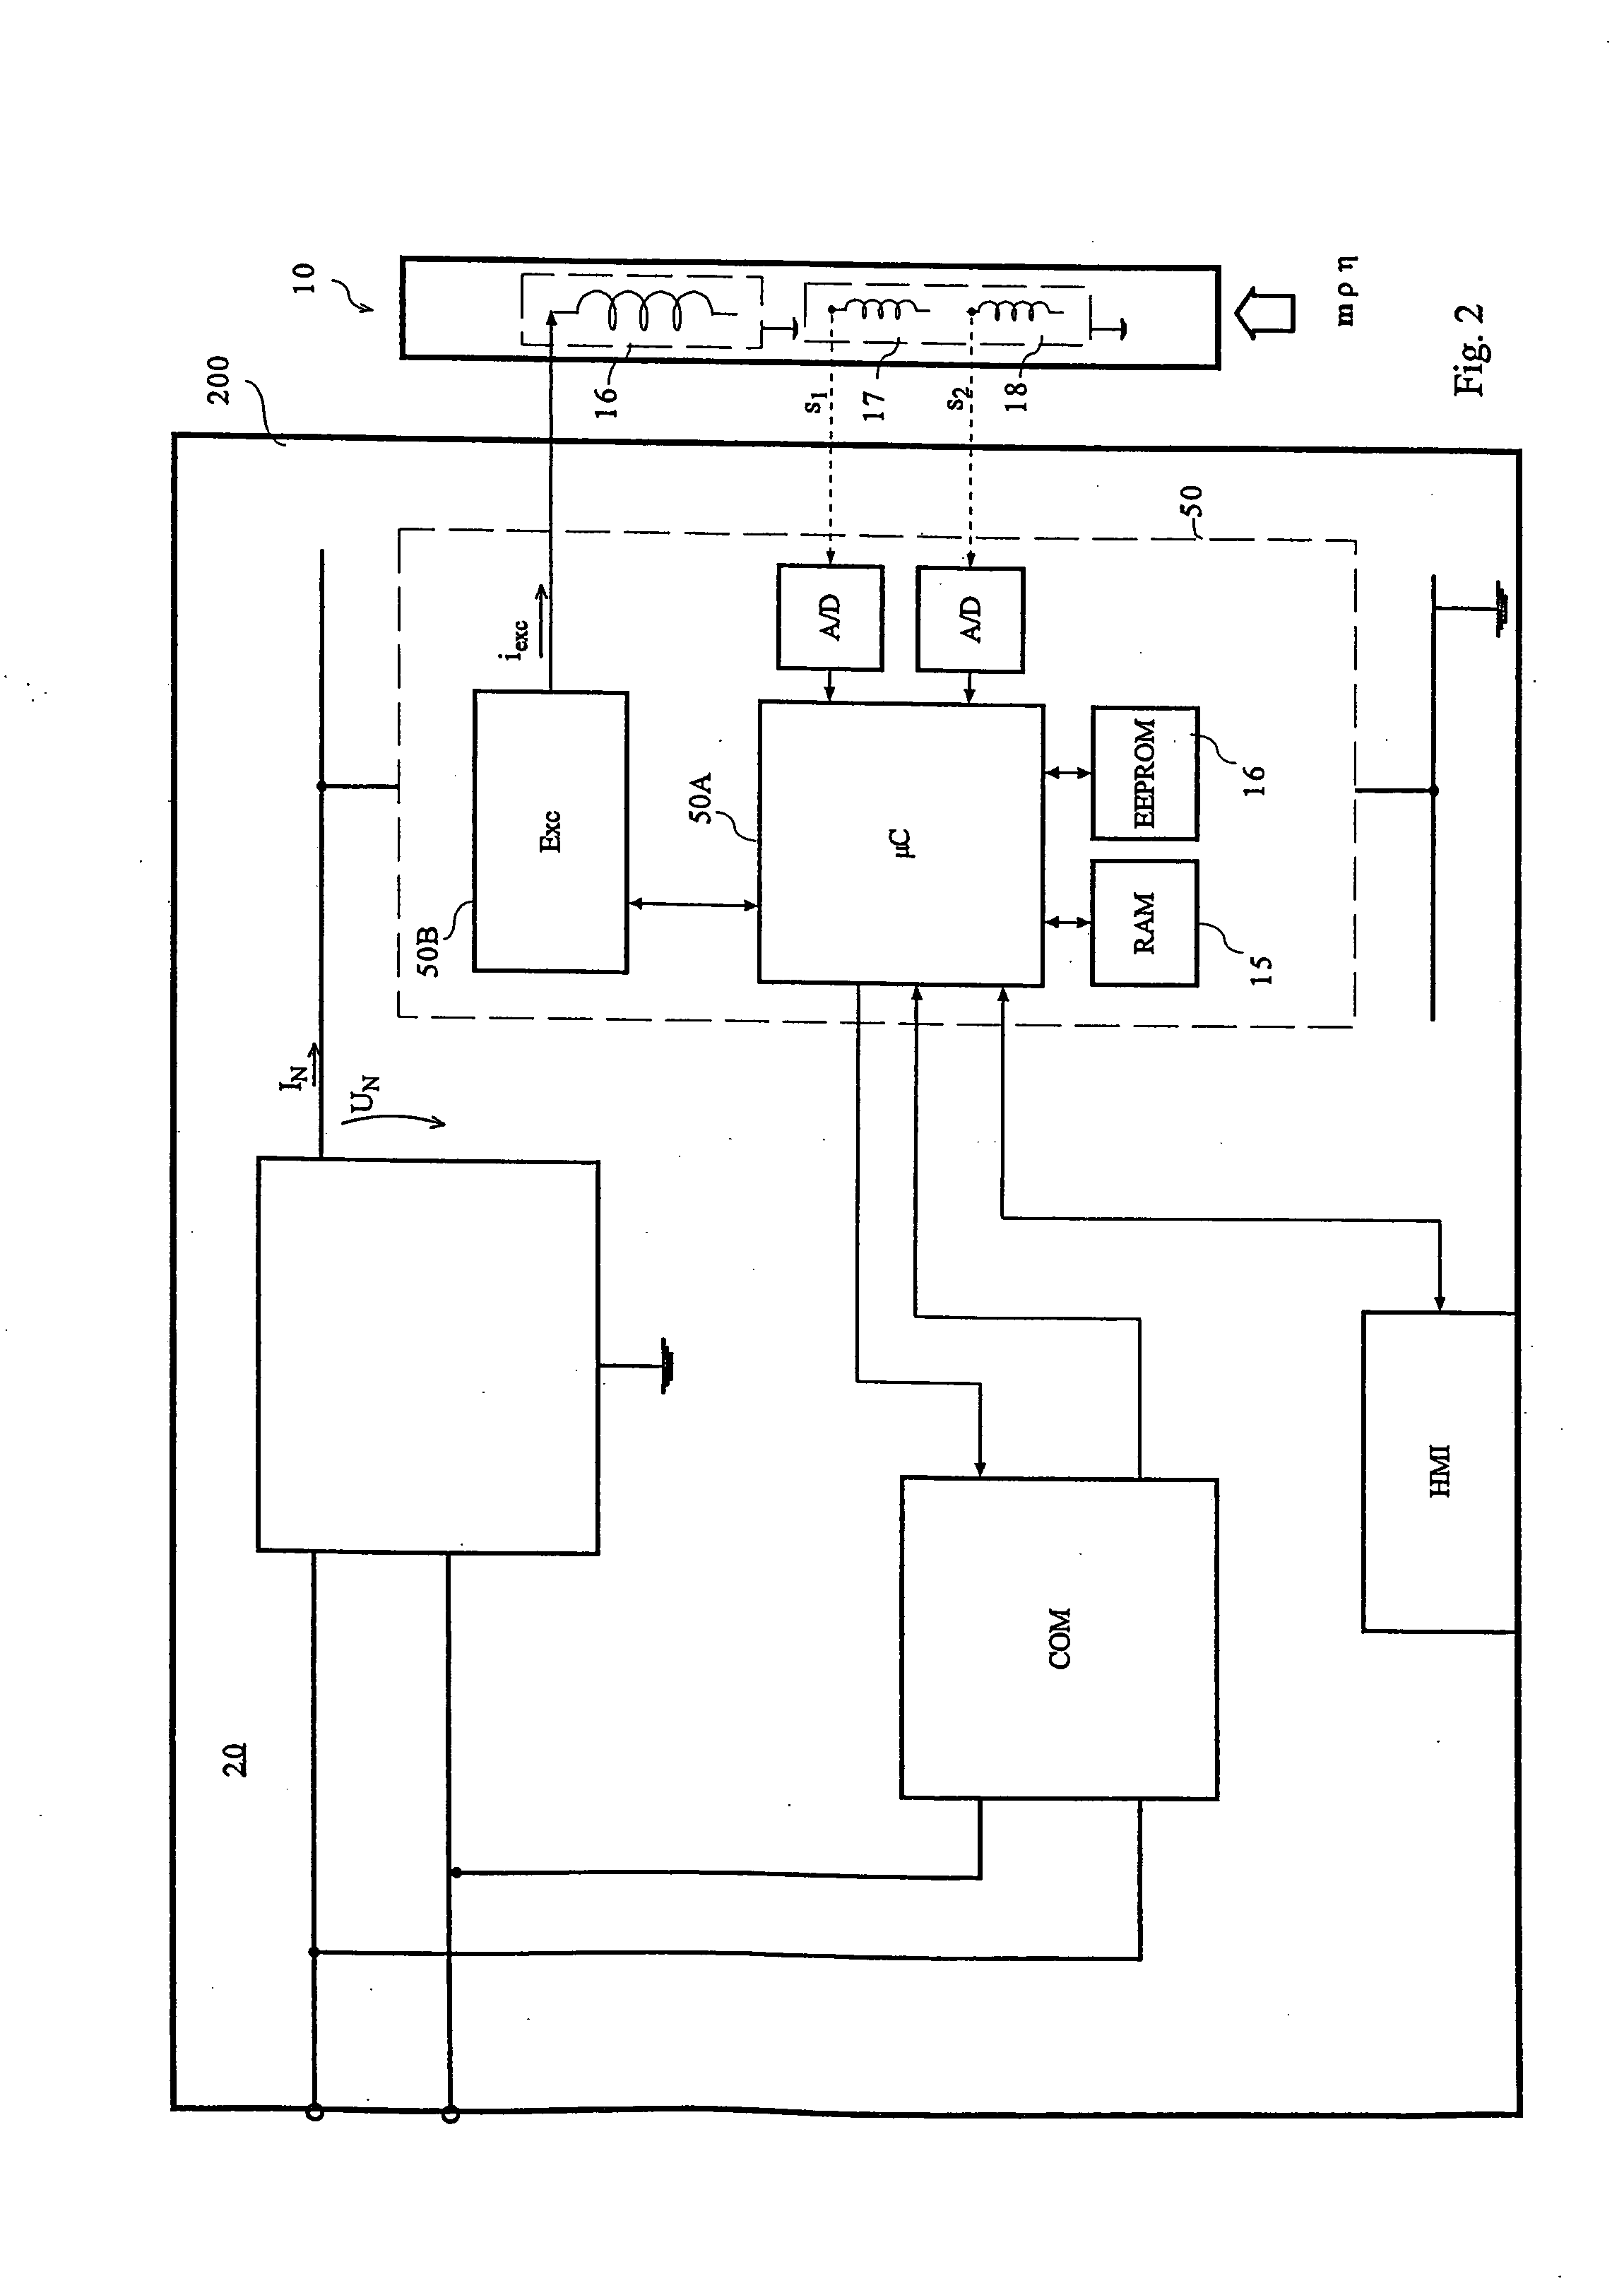 Method for start-up and/or reconfiguration of a programmable field-device